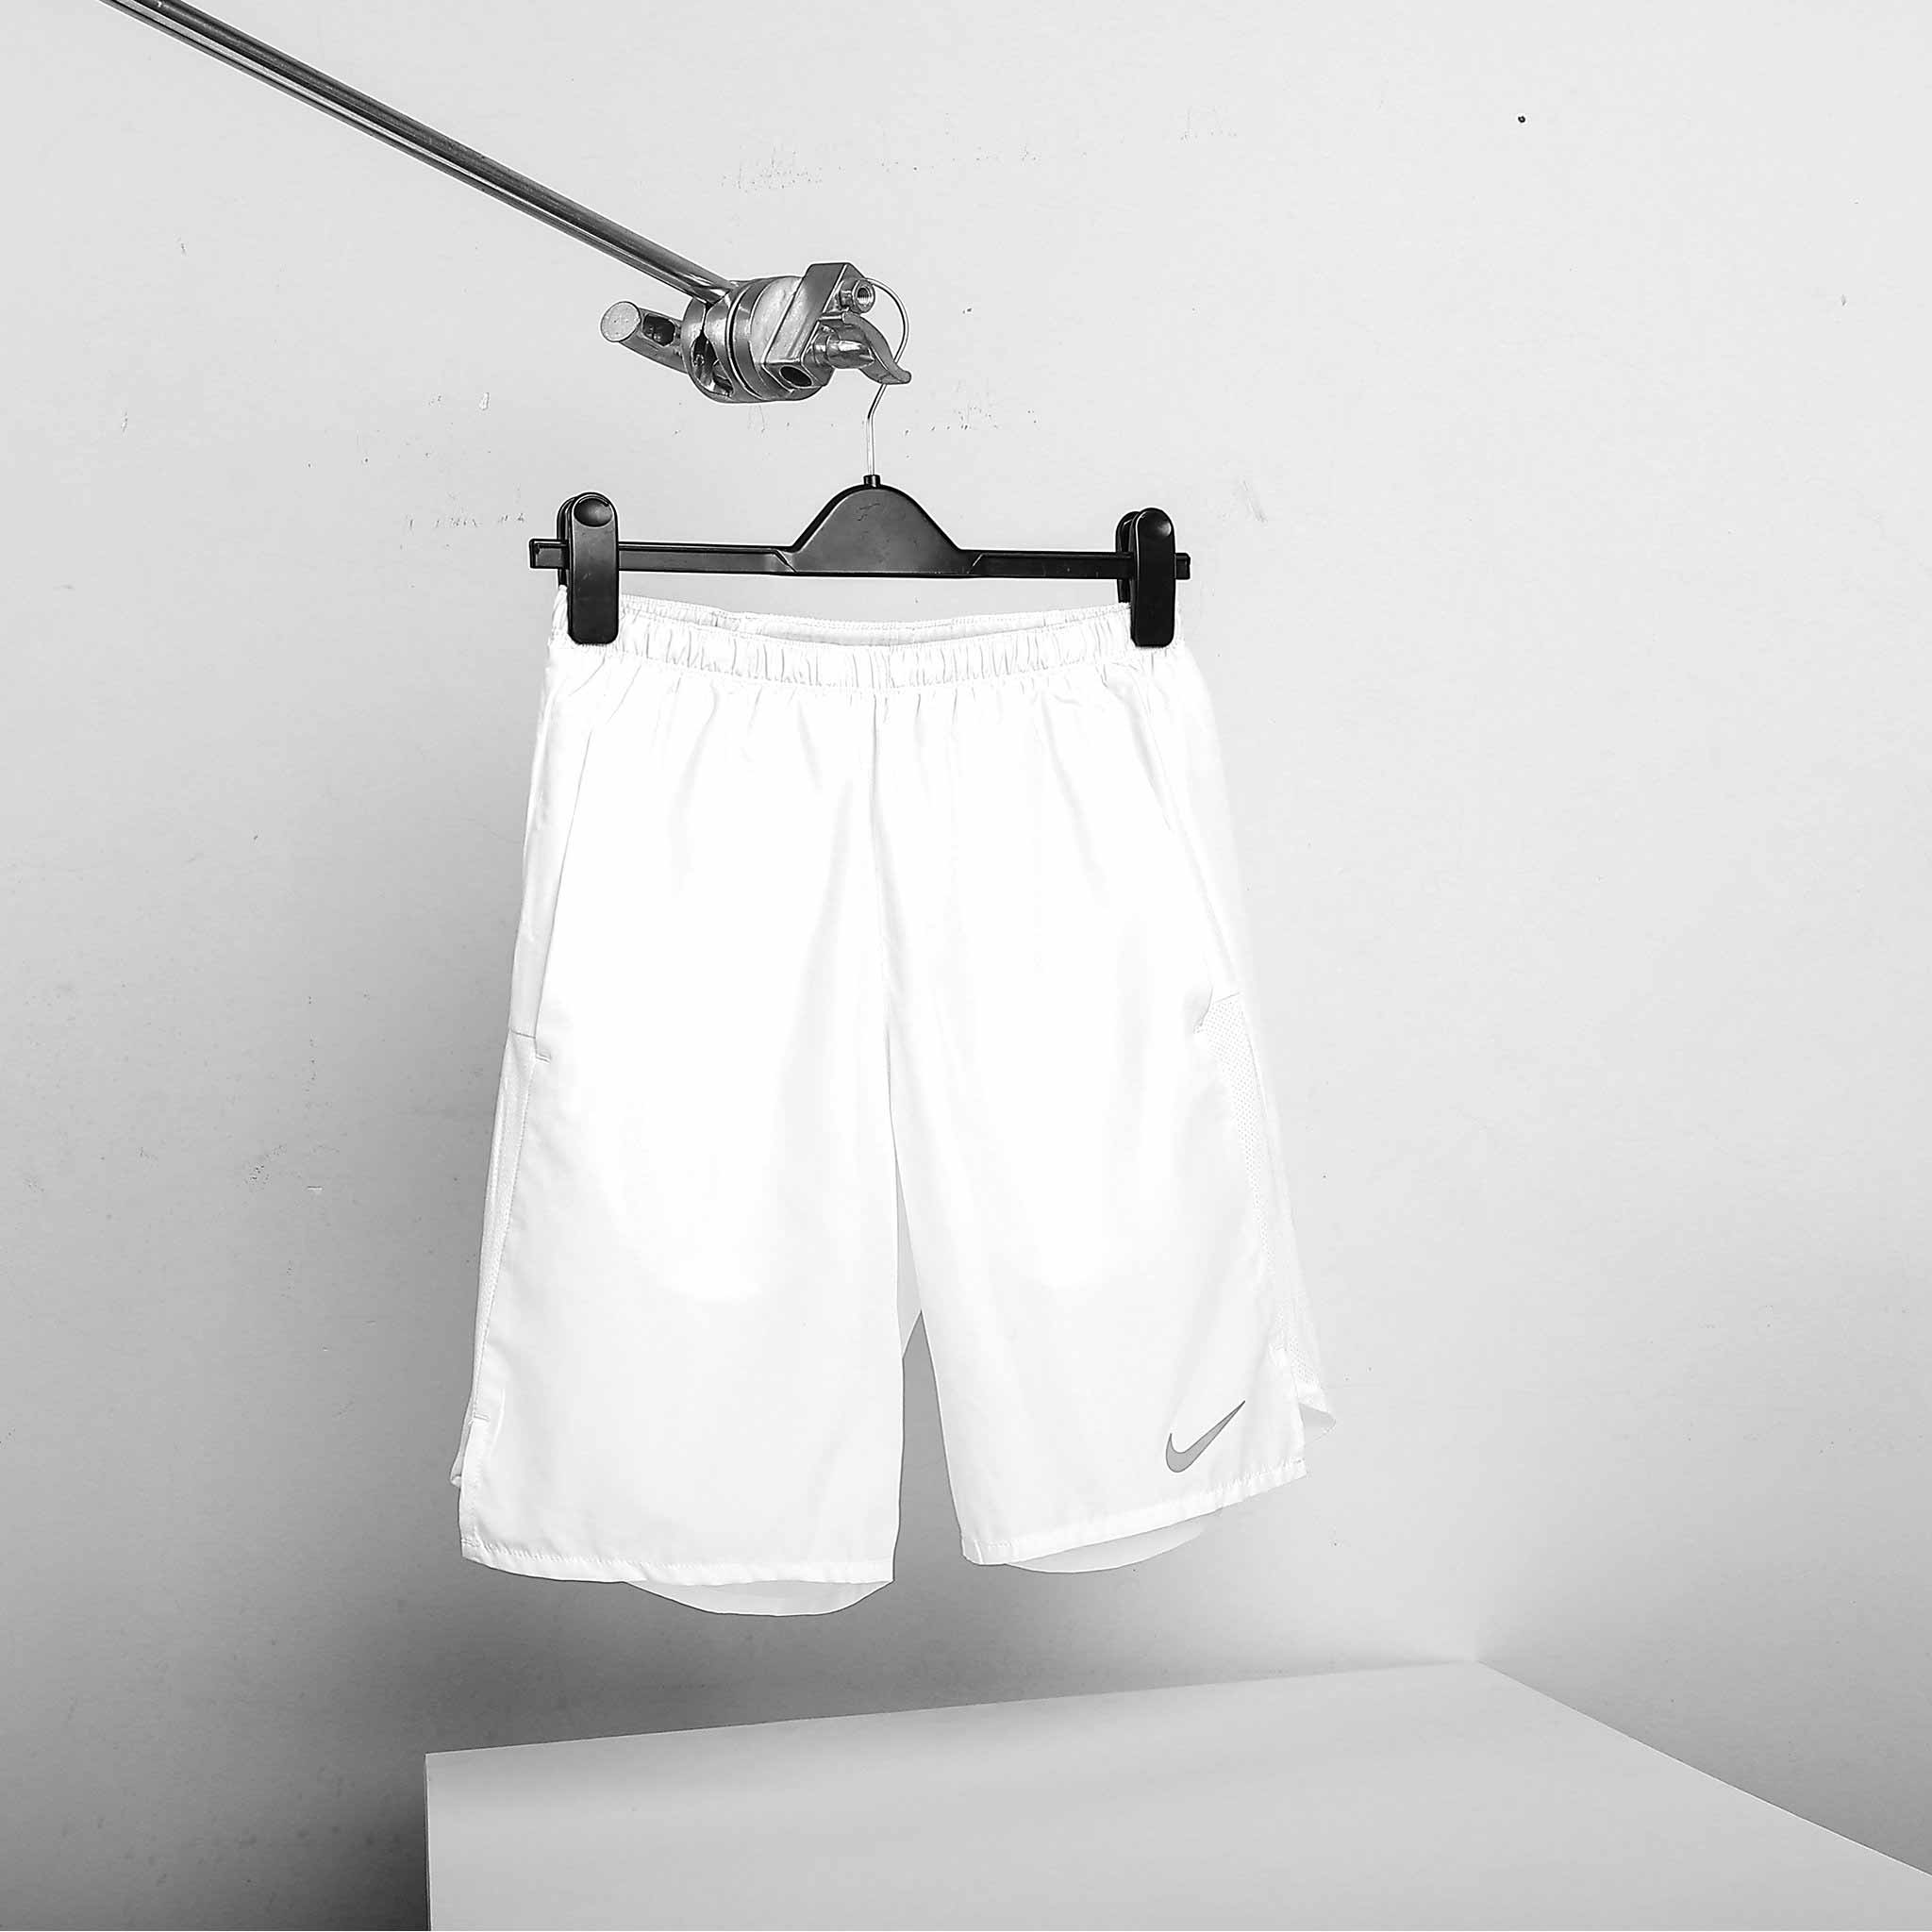 Nike Challenger Brief-lined 7 Running Shorts